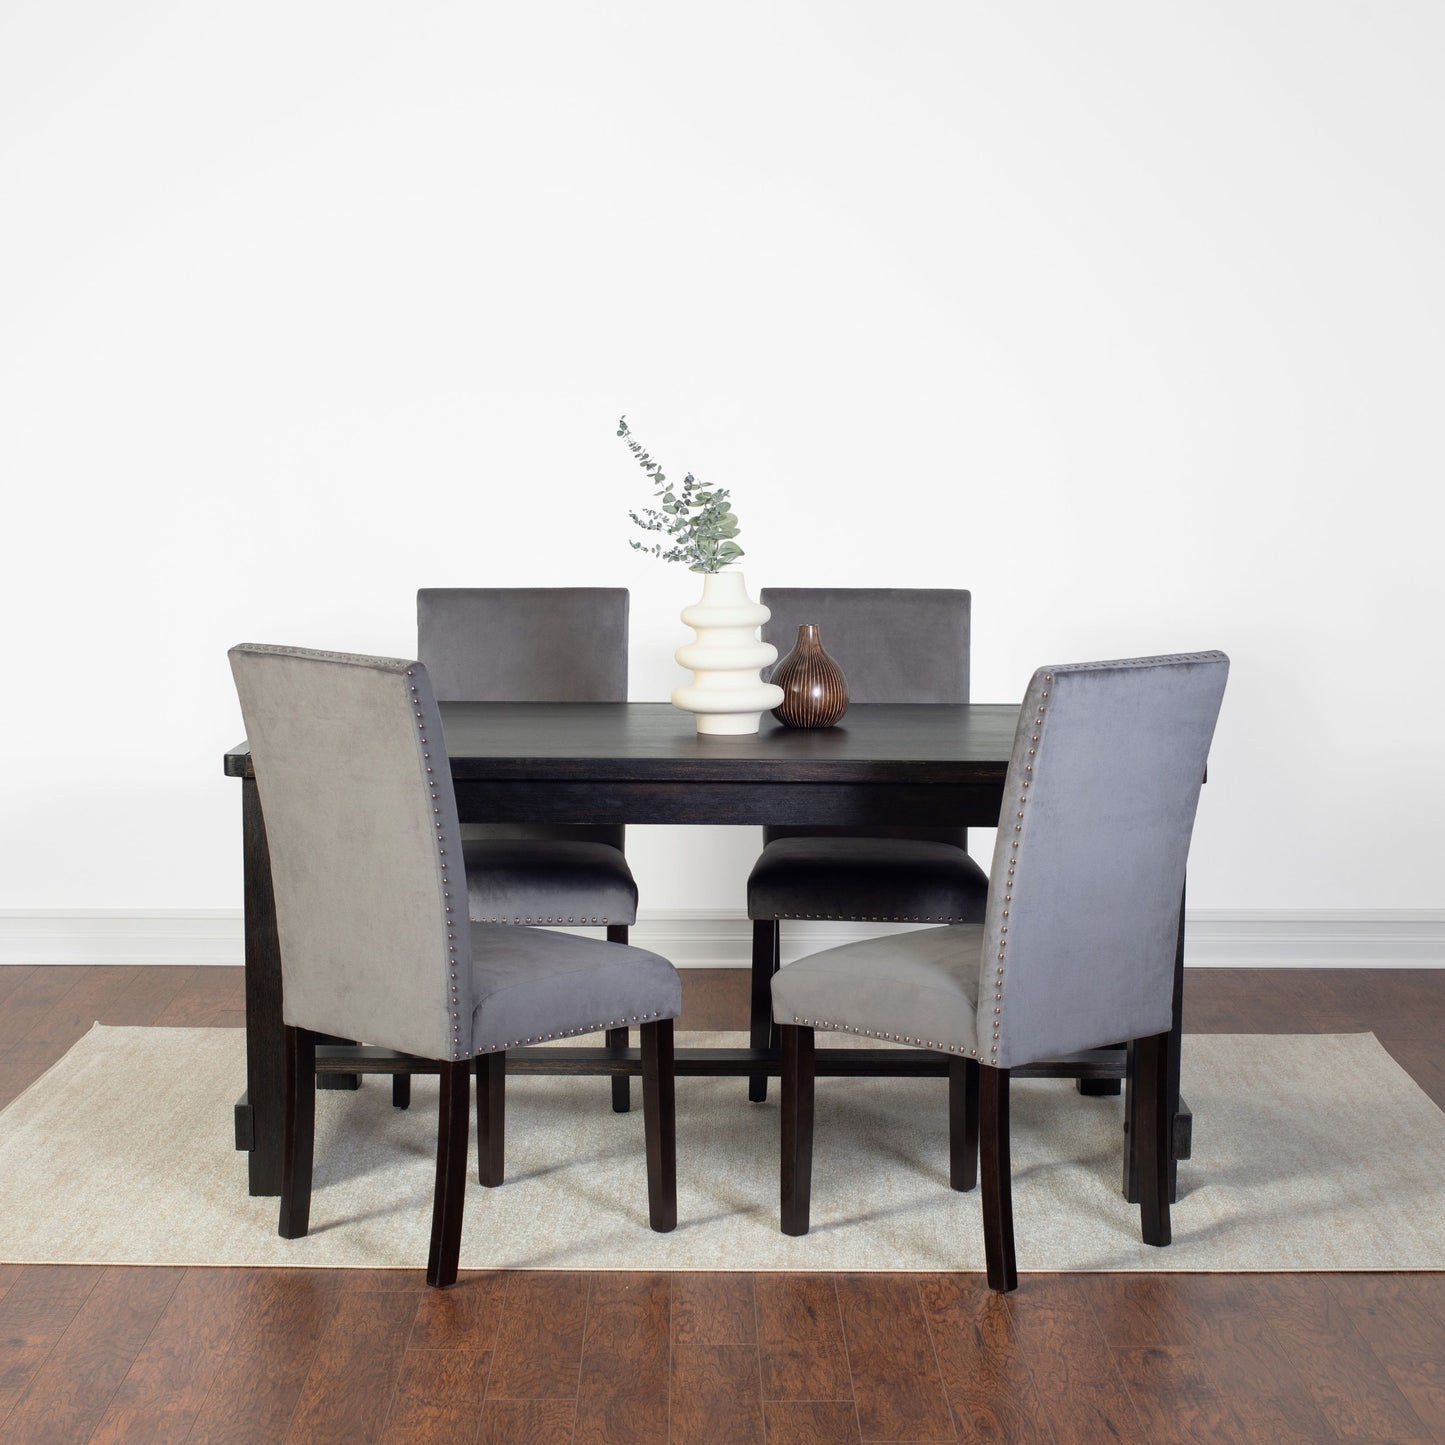 Vanzo Contemporary 5-Piece Dining Set, Dining Table with 4 Stylish Chairs